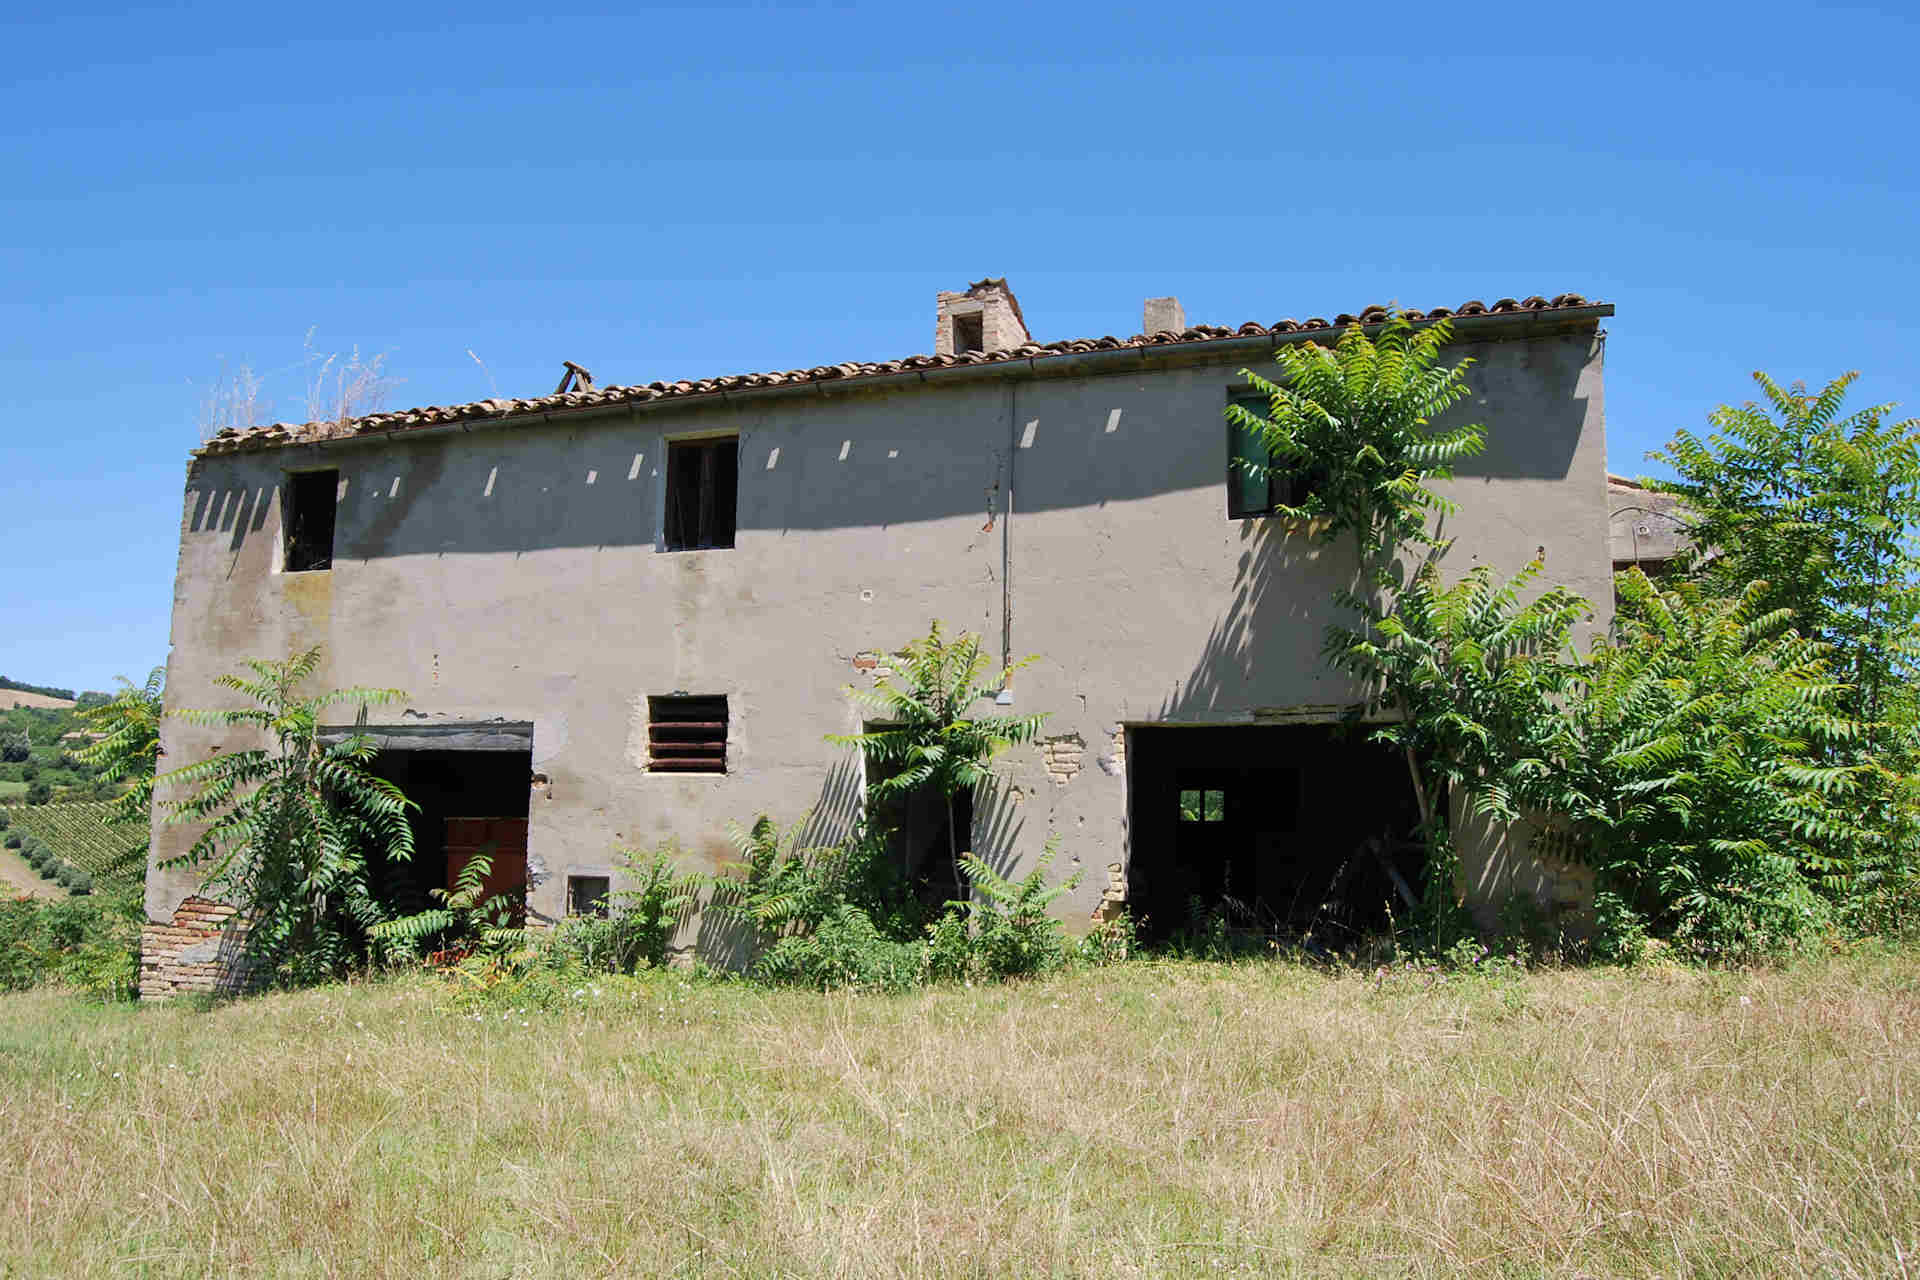 Country house near Montefiore dell'Aso